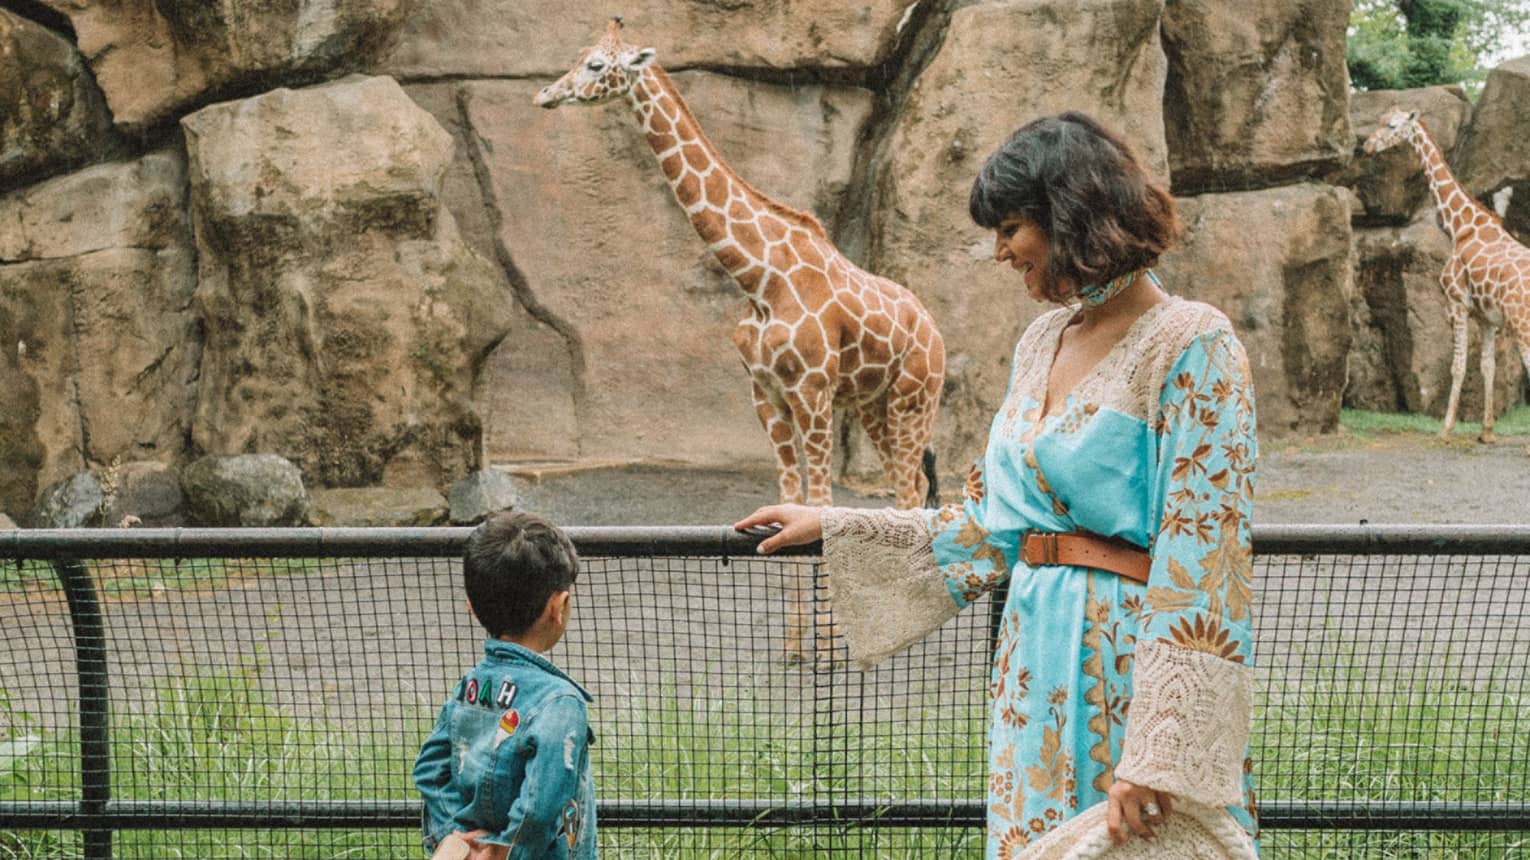 A mother with her son looking at giraffes in a zoo.